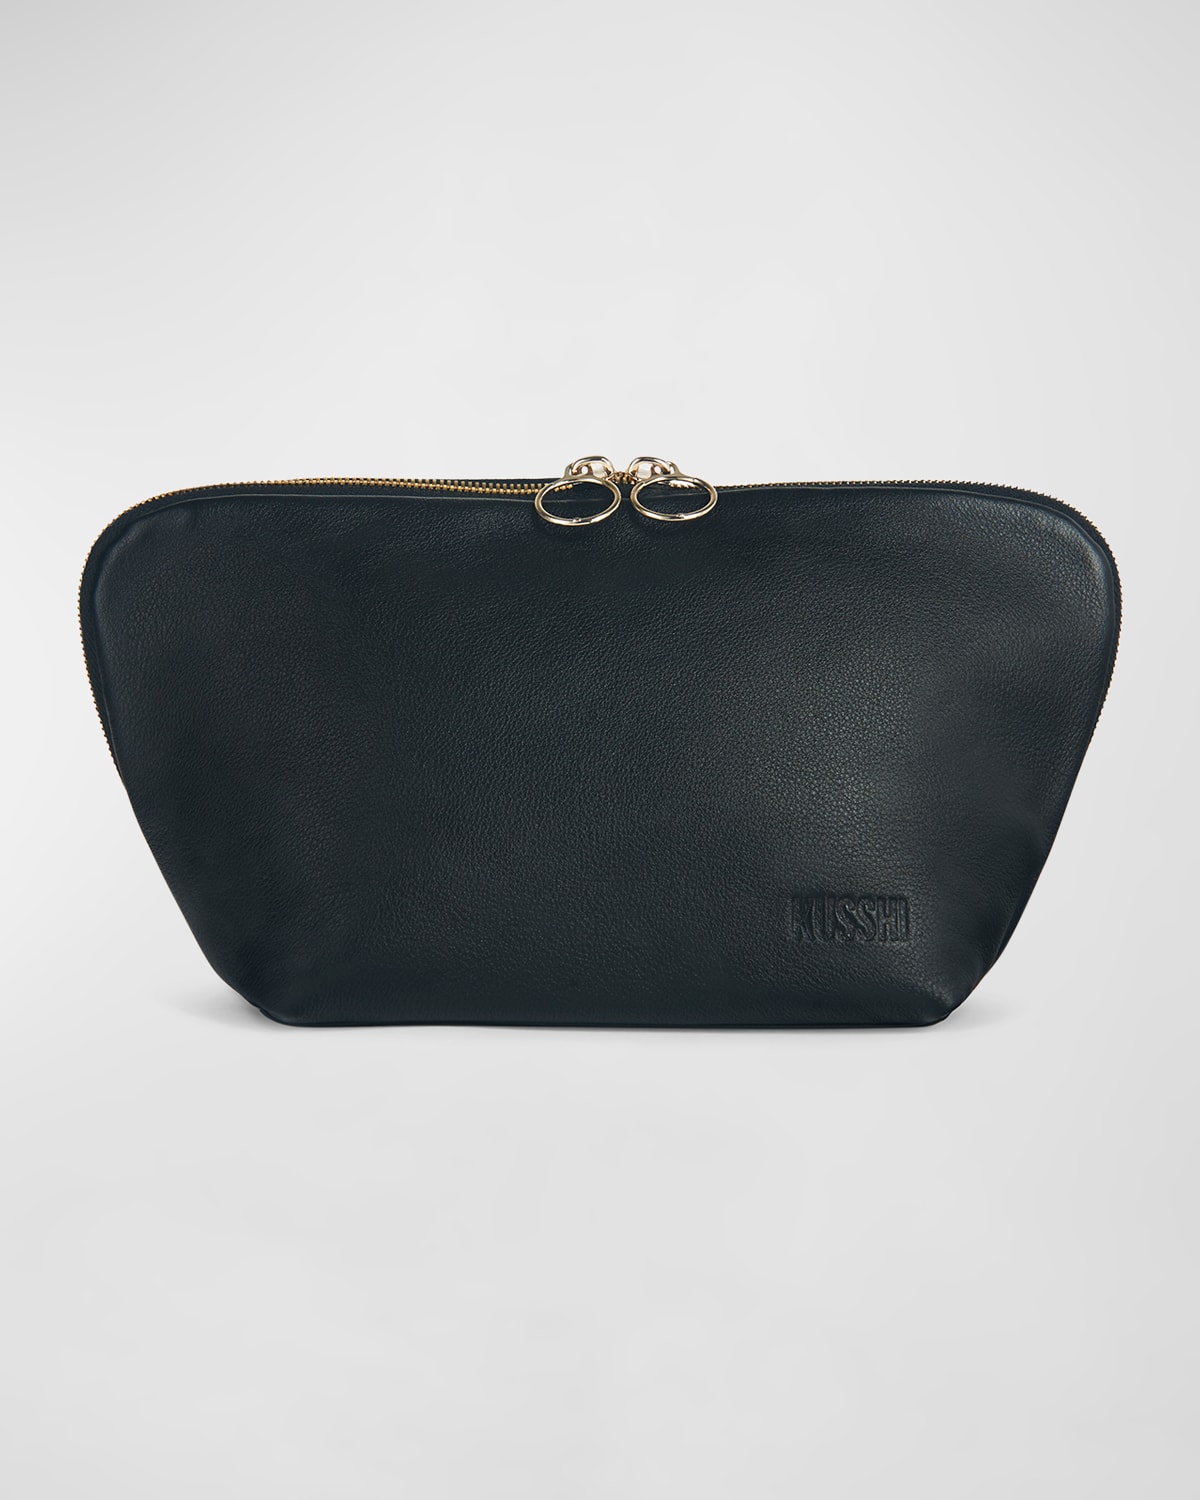 Kusshi Signature Leather Makeup Bag In Black/cool Grey